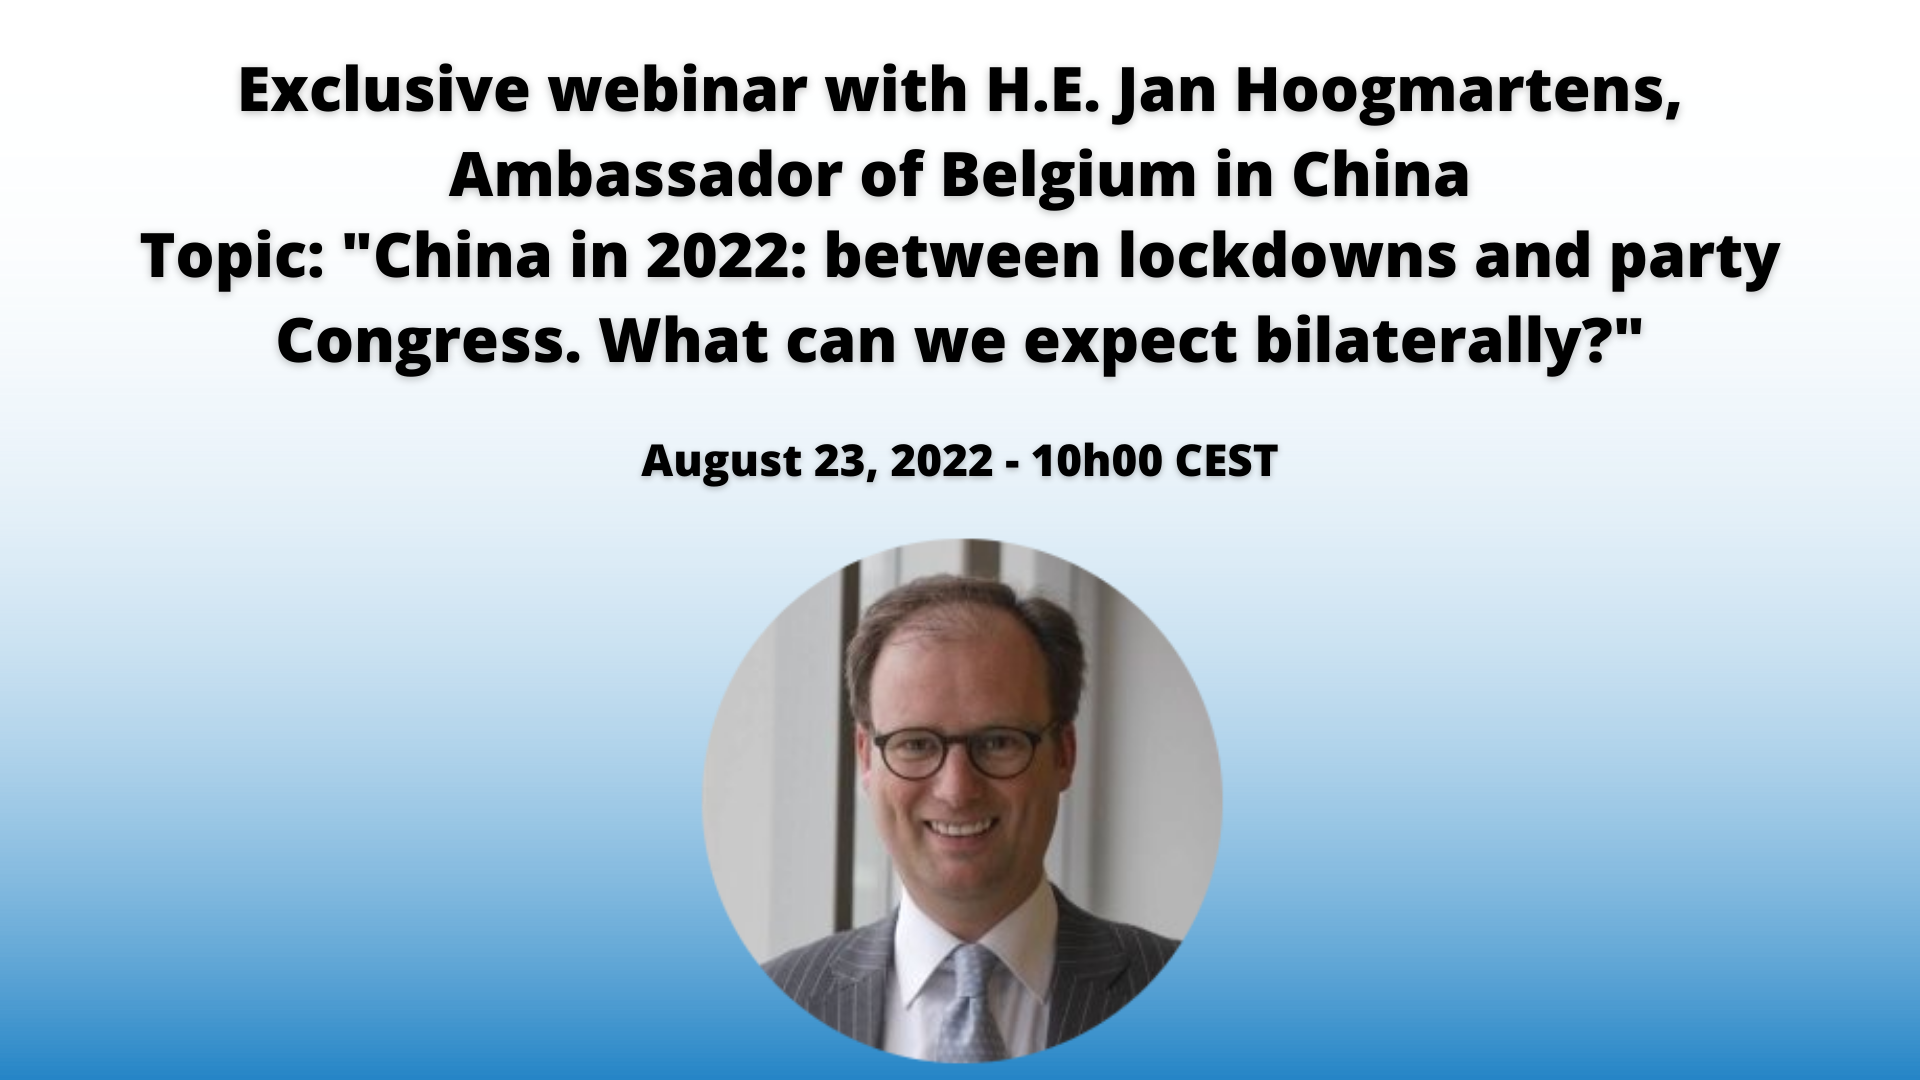 Exclusive webinar with H.E. Jan Hoogmartens, Ambassador of Belgium in China Topic: “China in 2022: between lockdowns and Party Congress. What can we expect bilaterally? – August 23, 2022 – 10h00 CEST